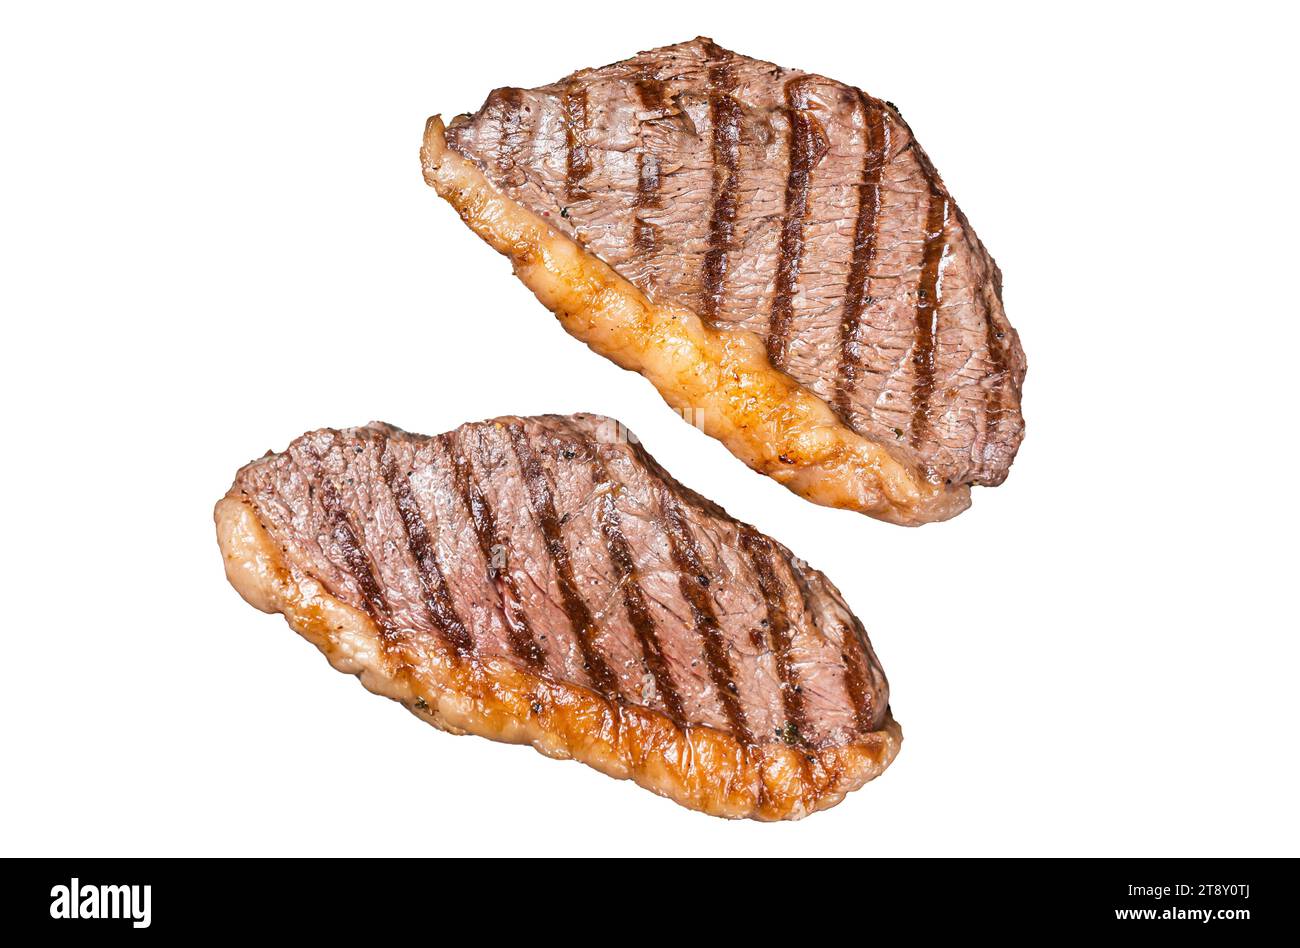 BBQ Grilled top sirloin steak, cup rump beef meat steak in a steel tray. Isolated, white background Stock Photo